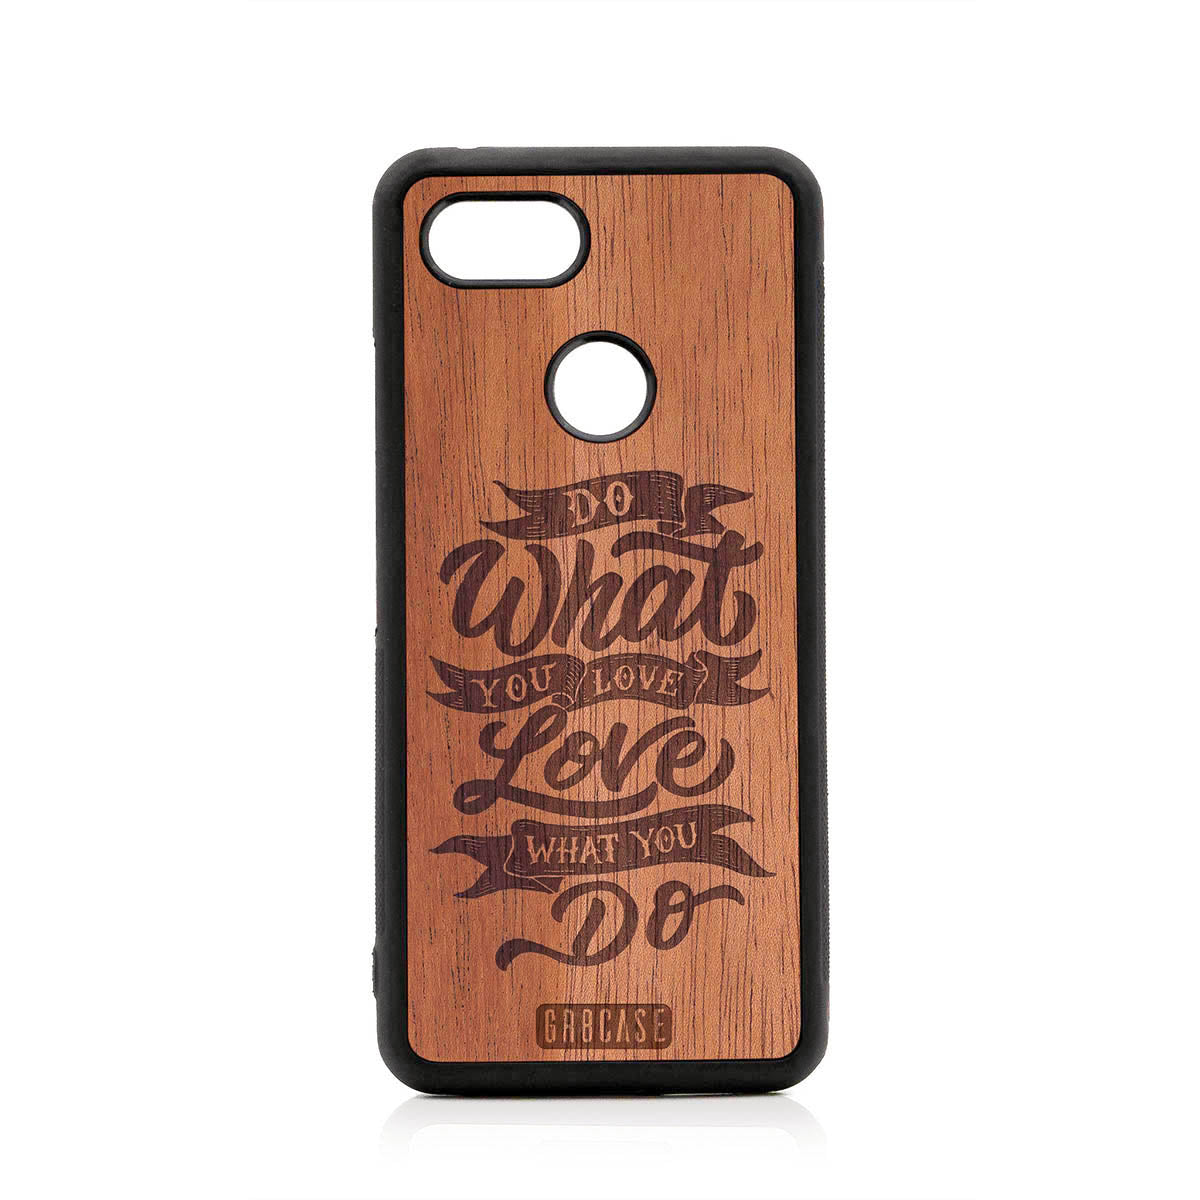 Do What You Love Love What You Do Design Wood Case For Google Pixel 3 by GR8CASE